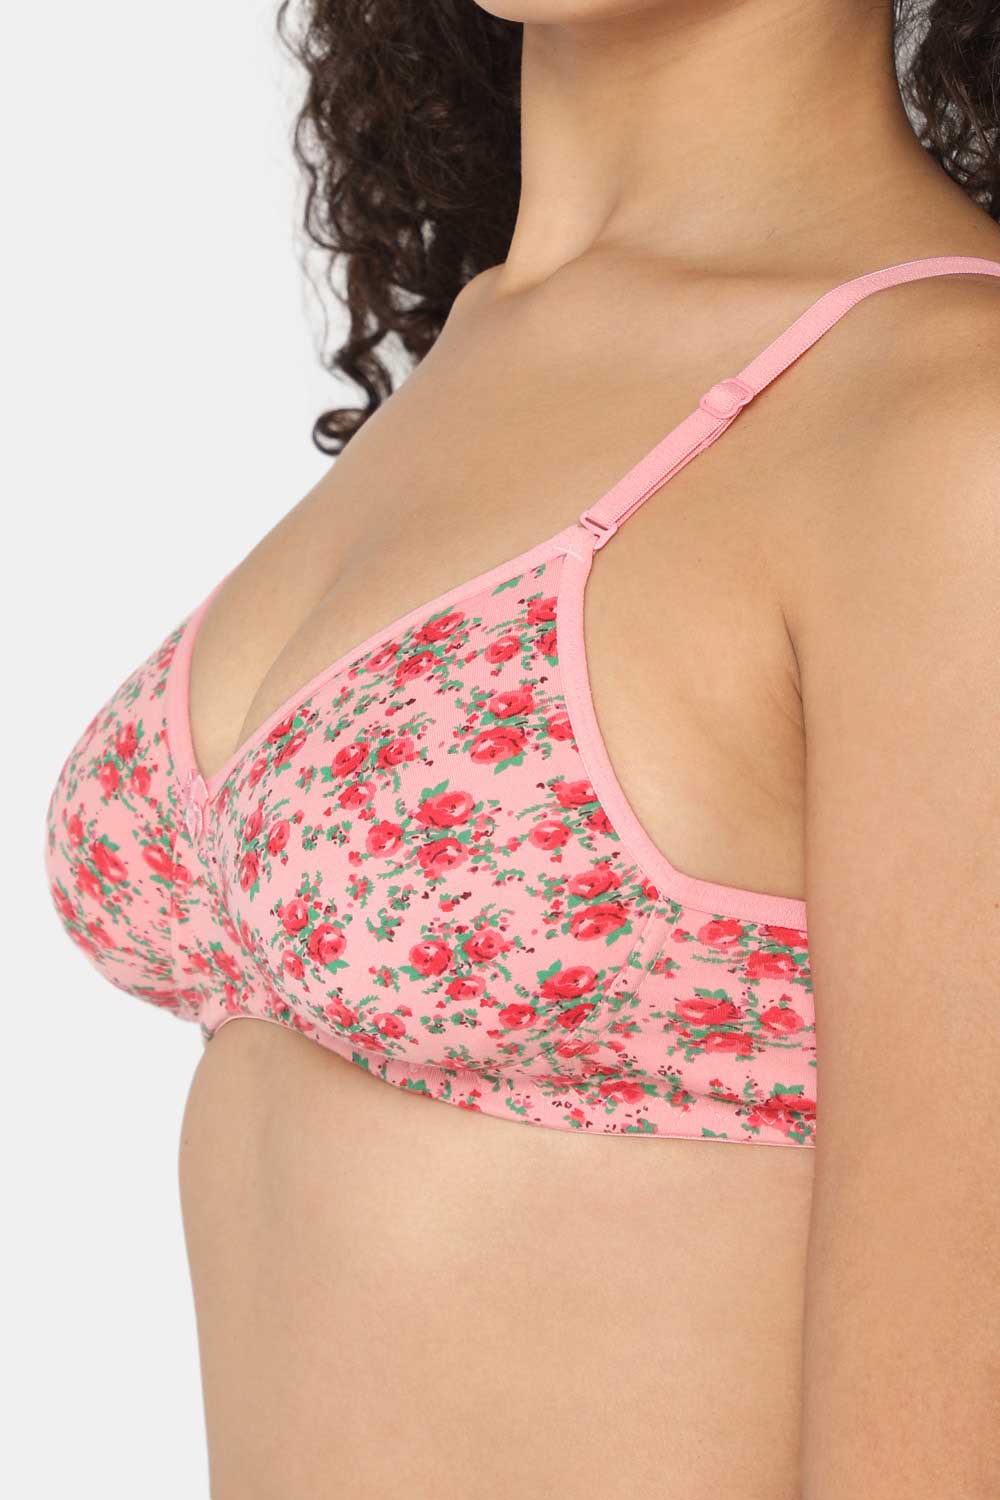 Buy Intimacy LINGERIE Floral Printed Full Coverage Everyday